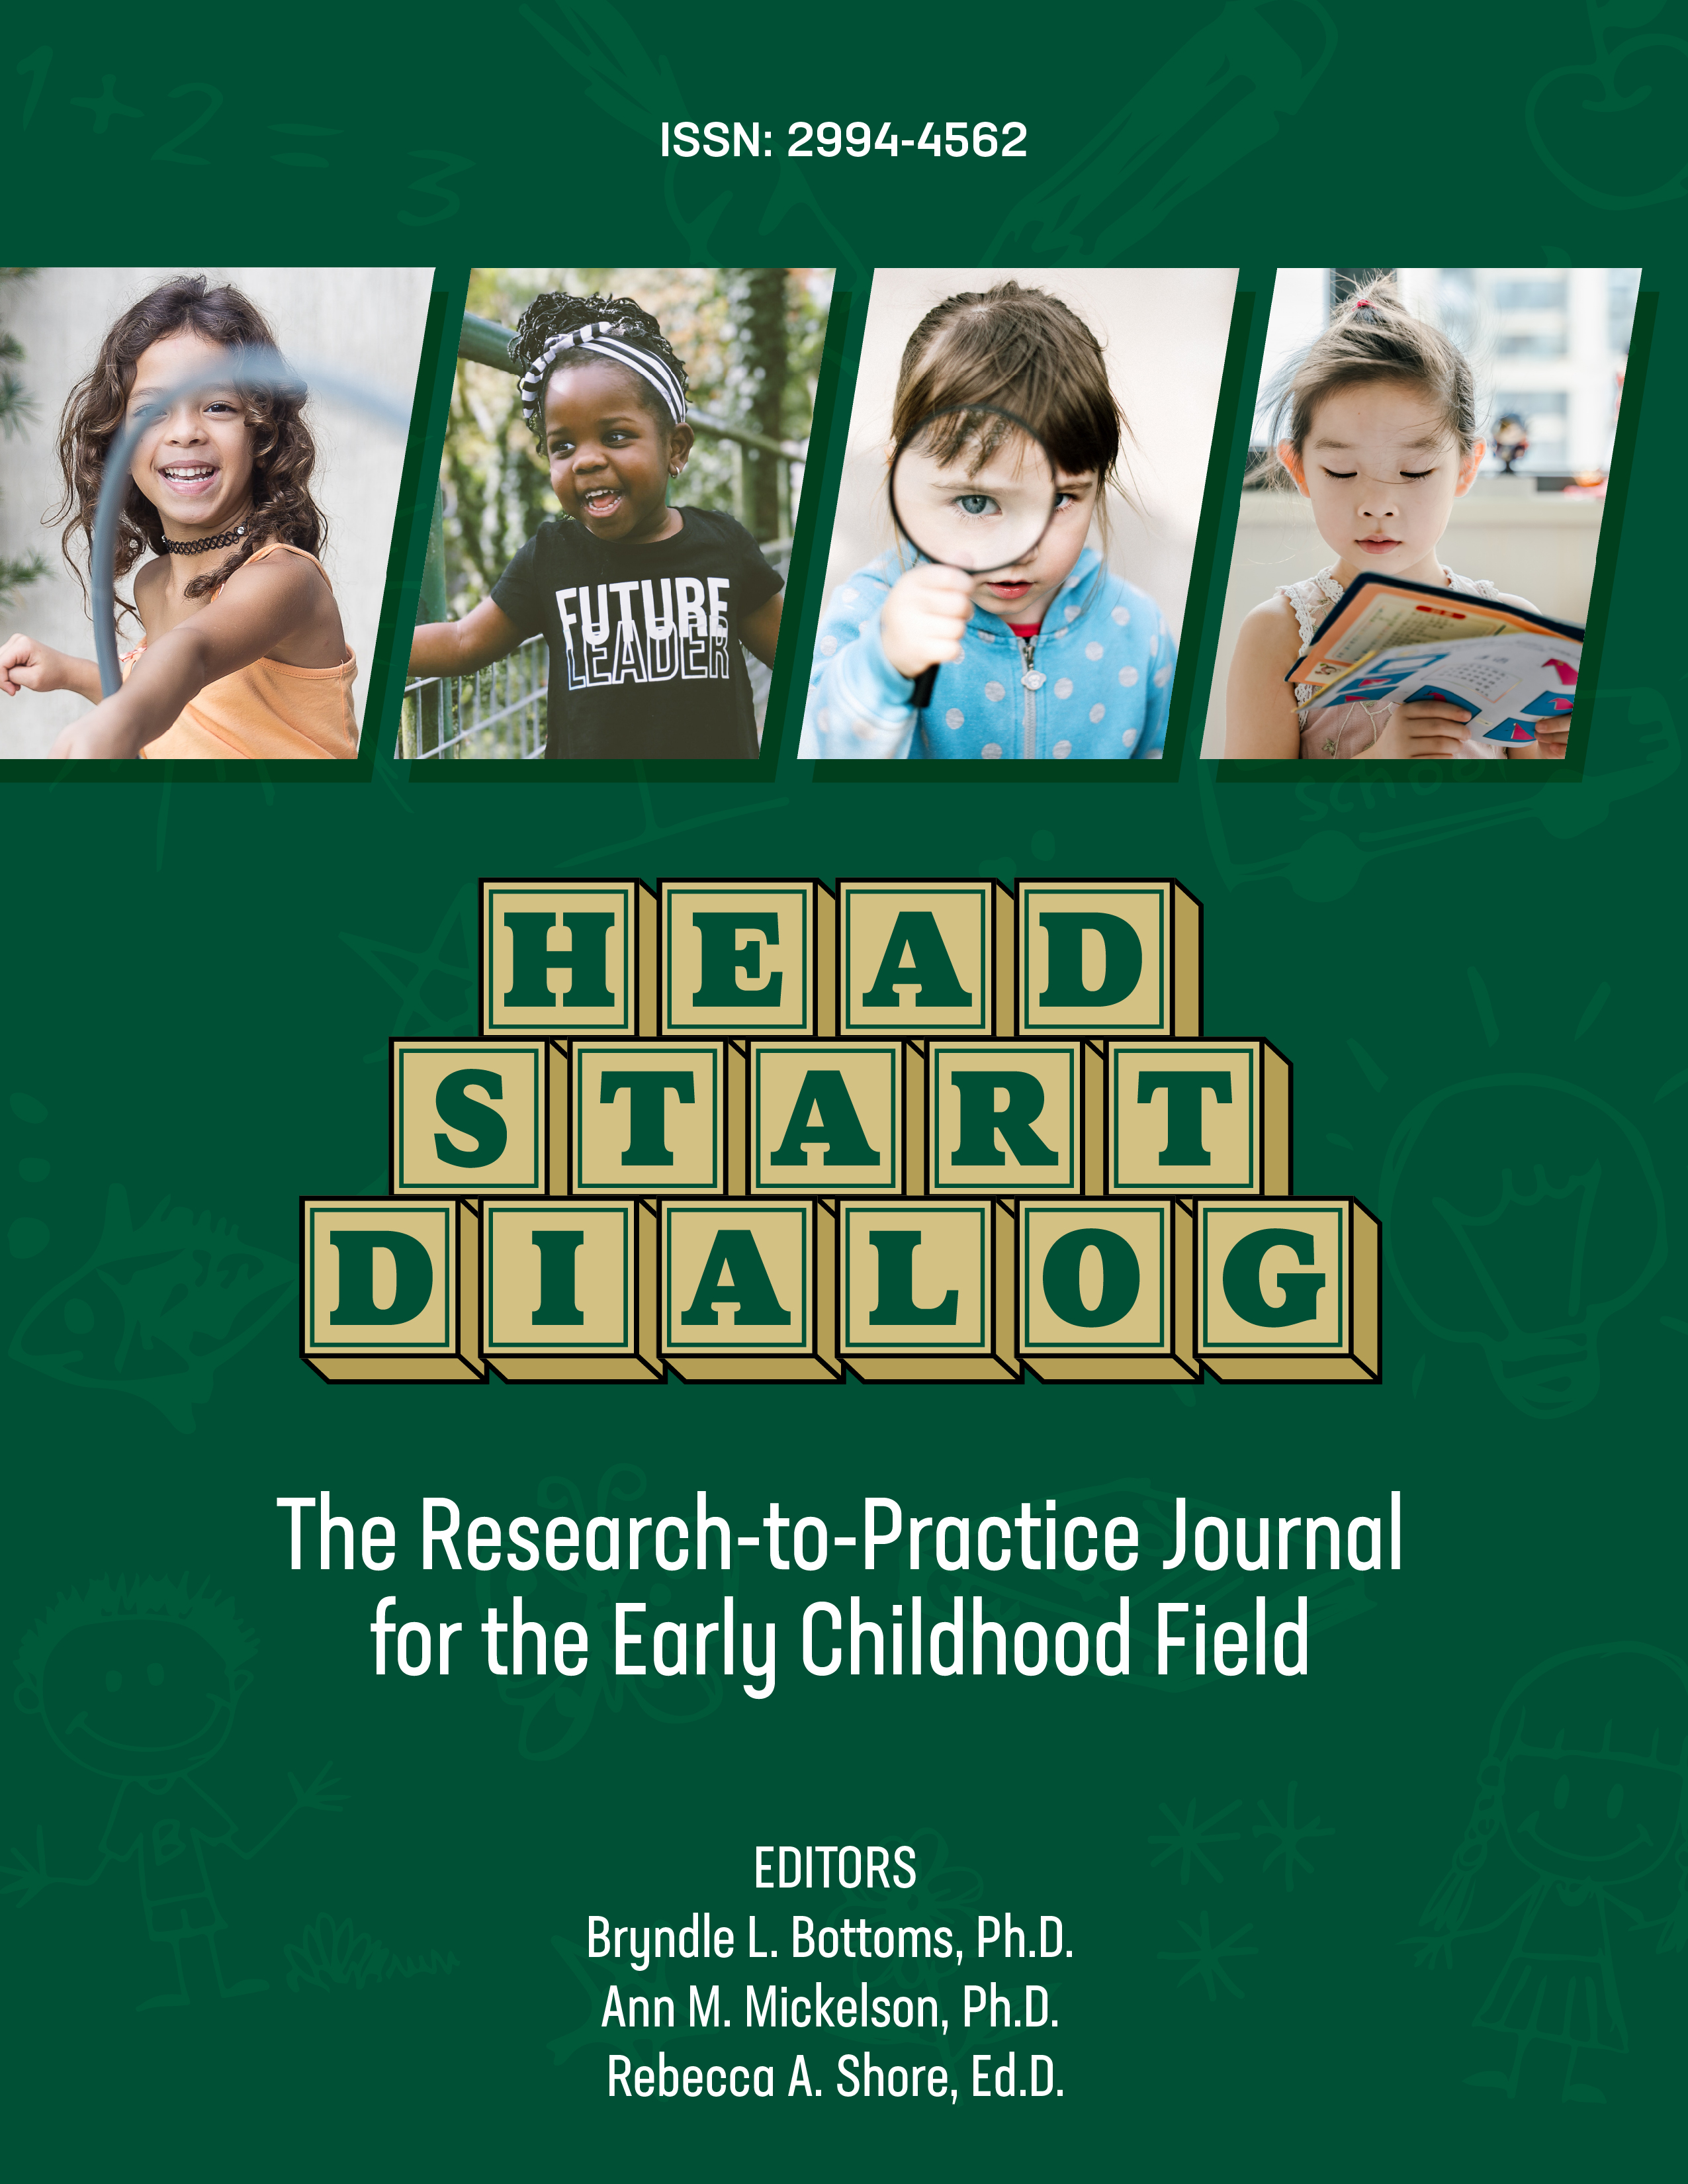 Cover for Head Start Dialog: The Research-to-Practice Journal for the Early Childhood Field. Images of four children and text in children's blocks